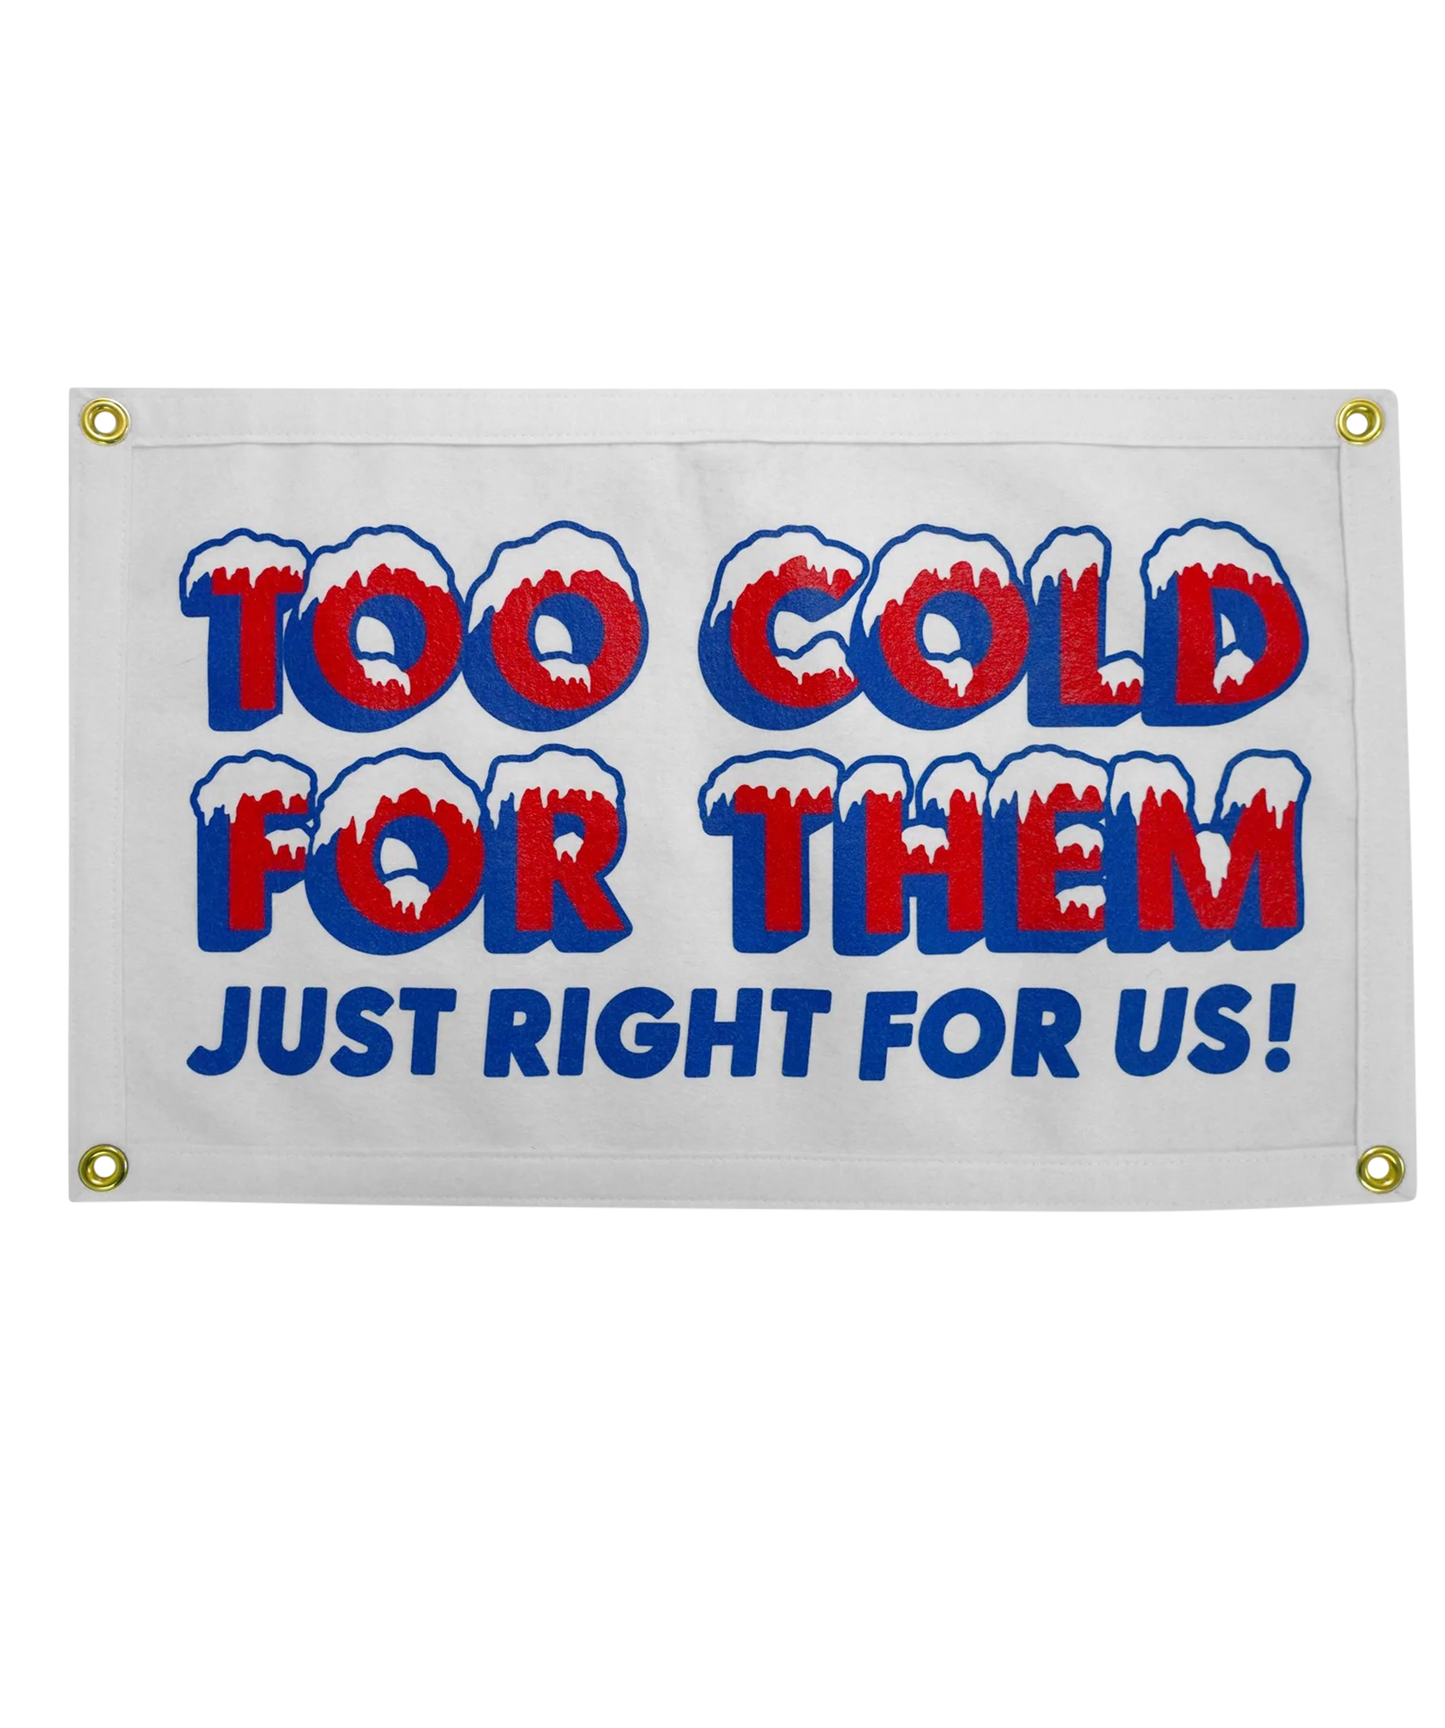 Too Cold For Them Just Right For Us! Camp Flag